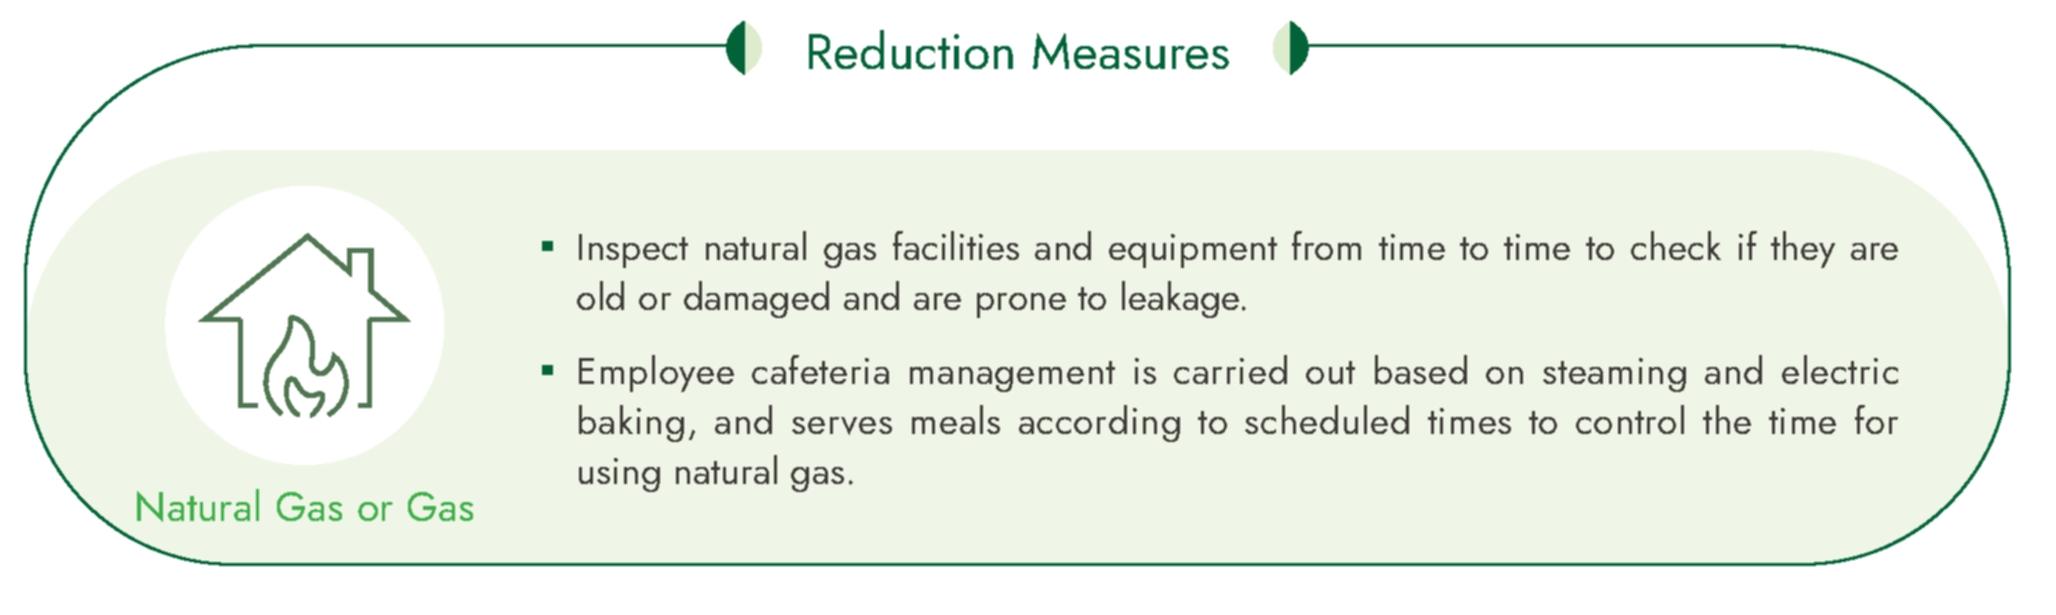 Natural gas or gas Reduction Measures